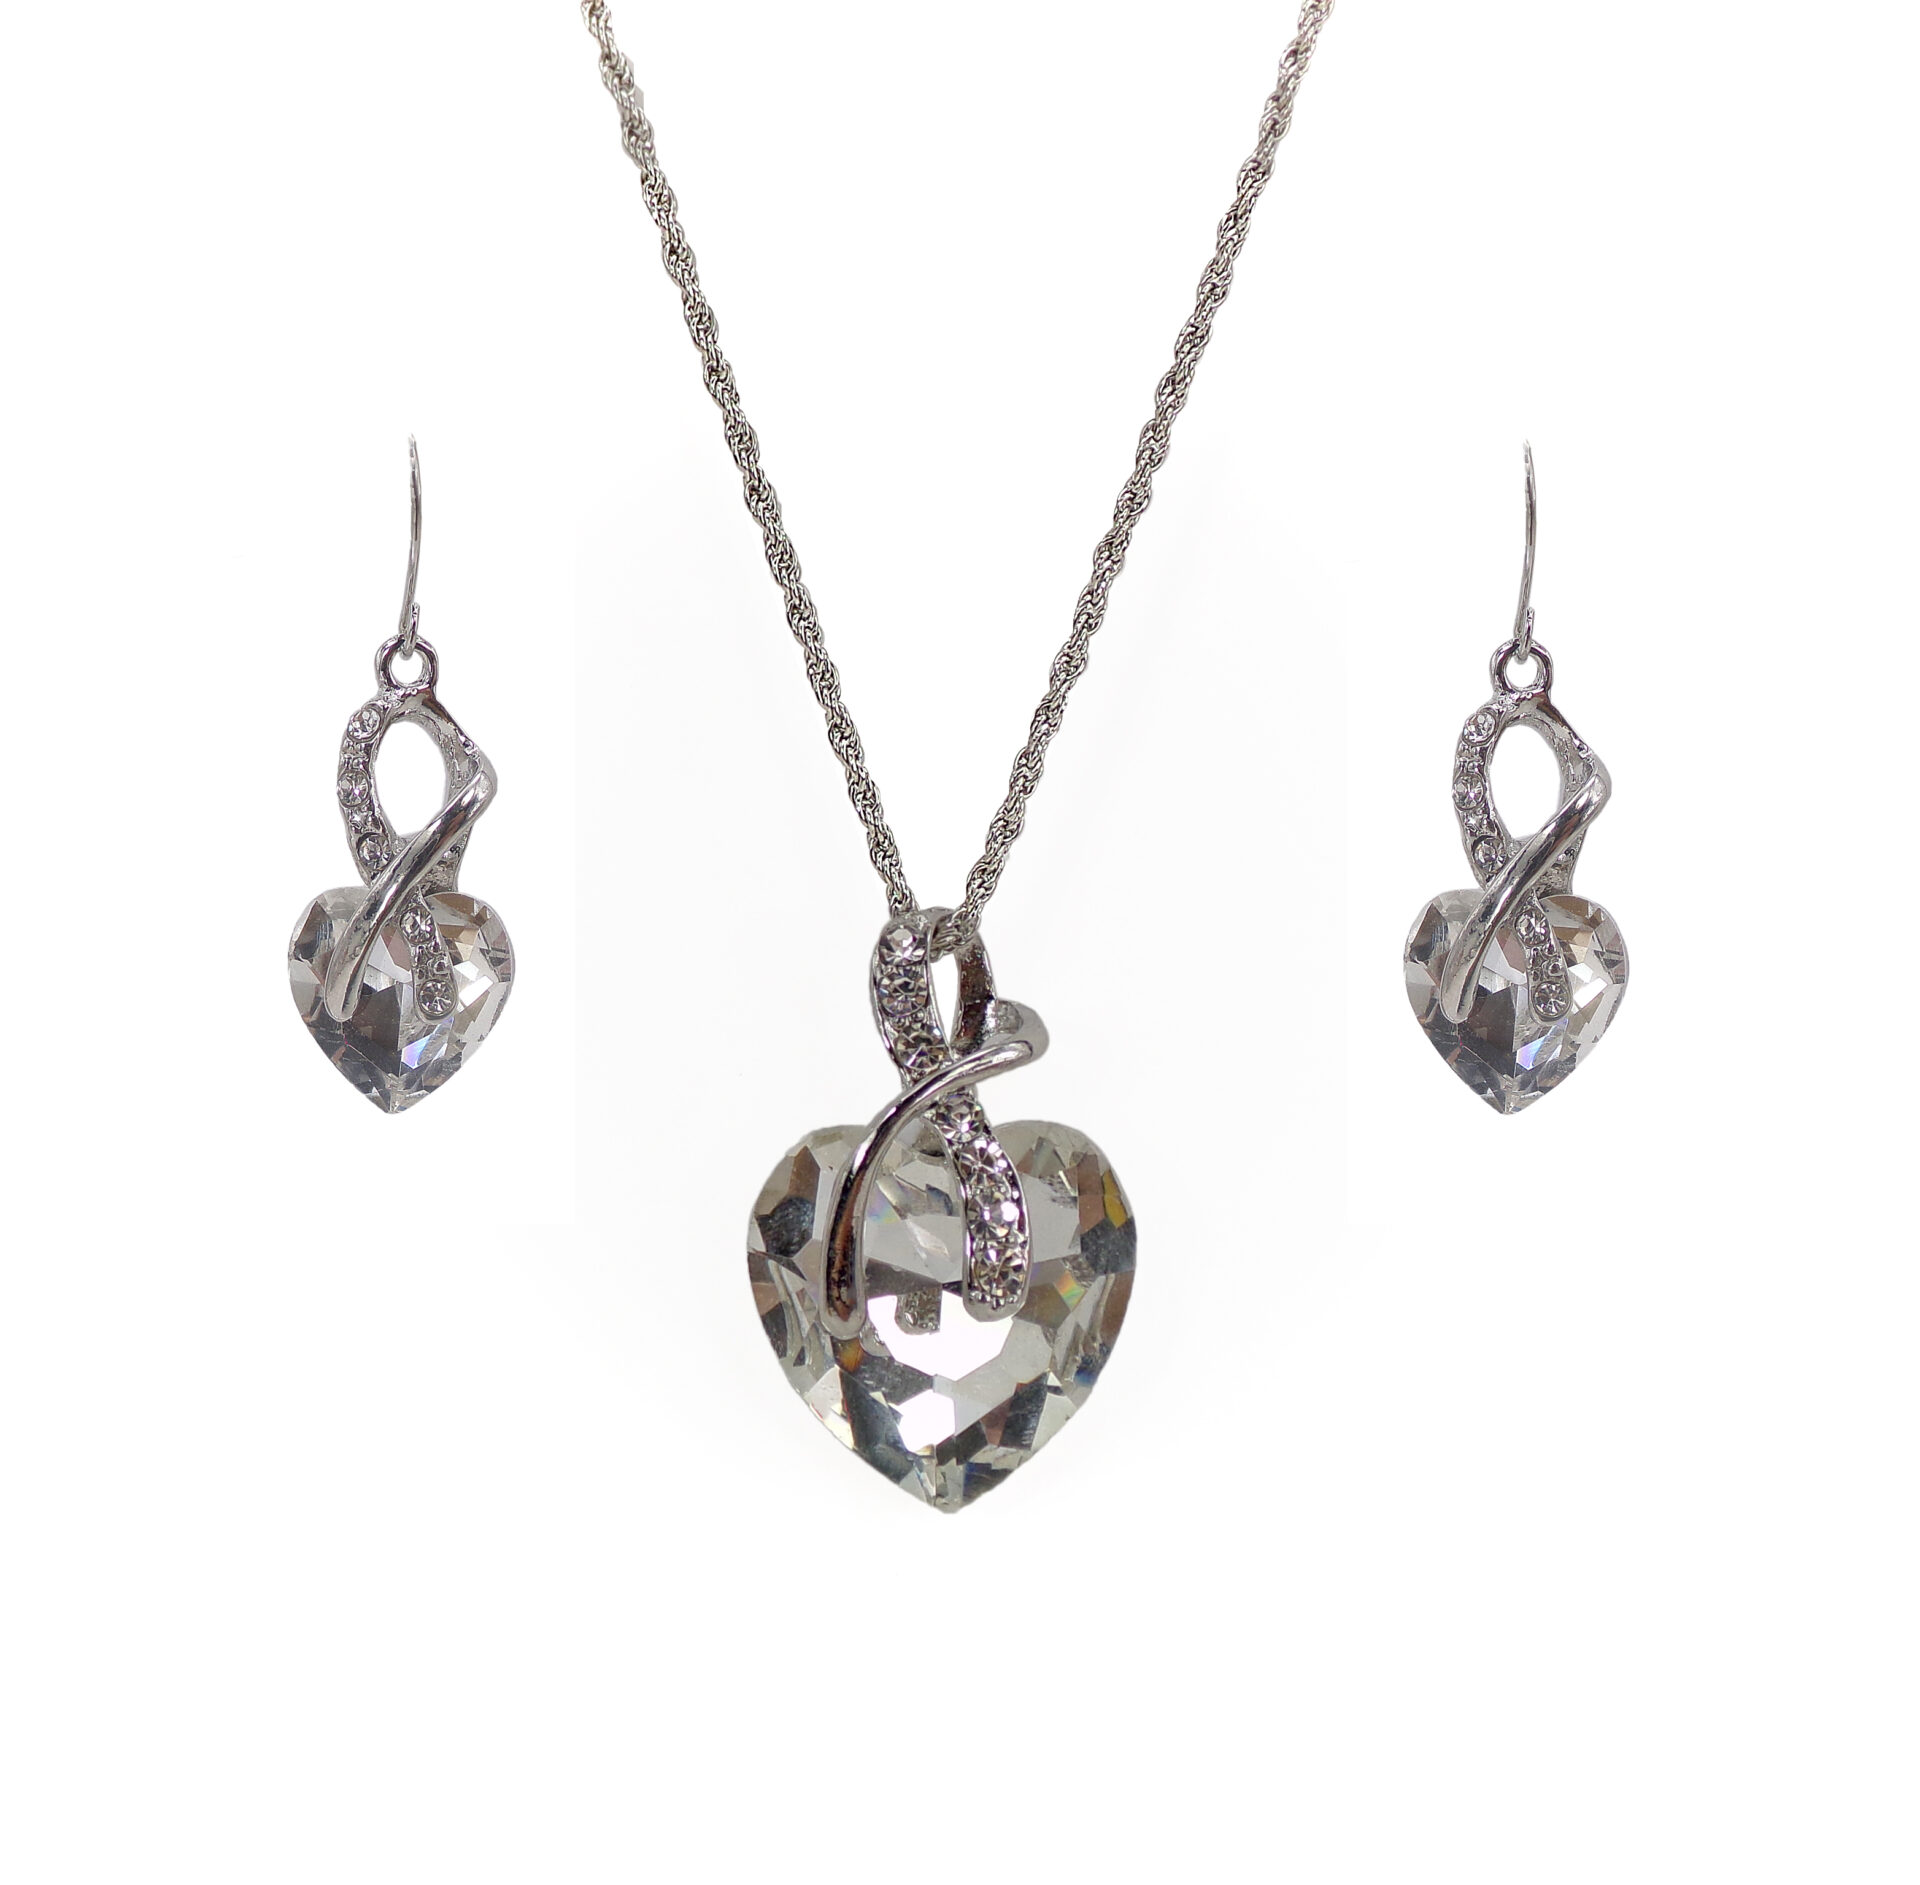 A large crystal heart pendant and earrings set